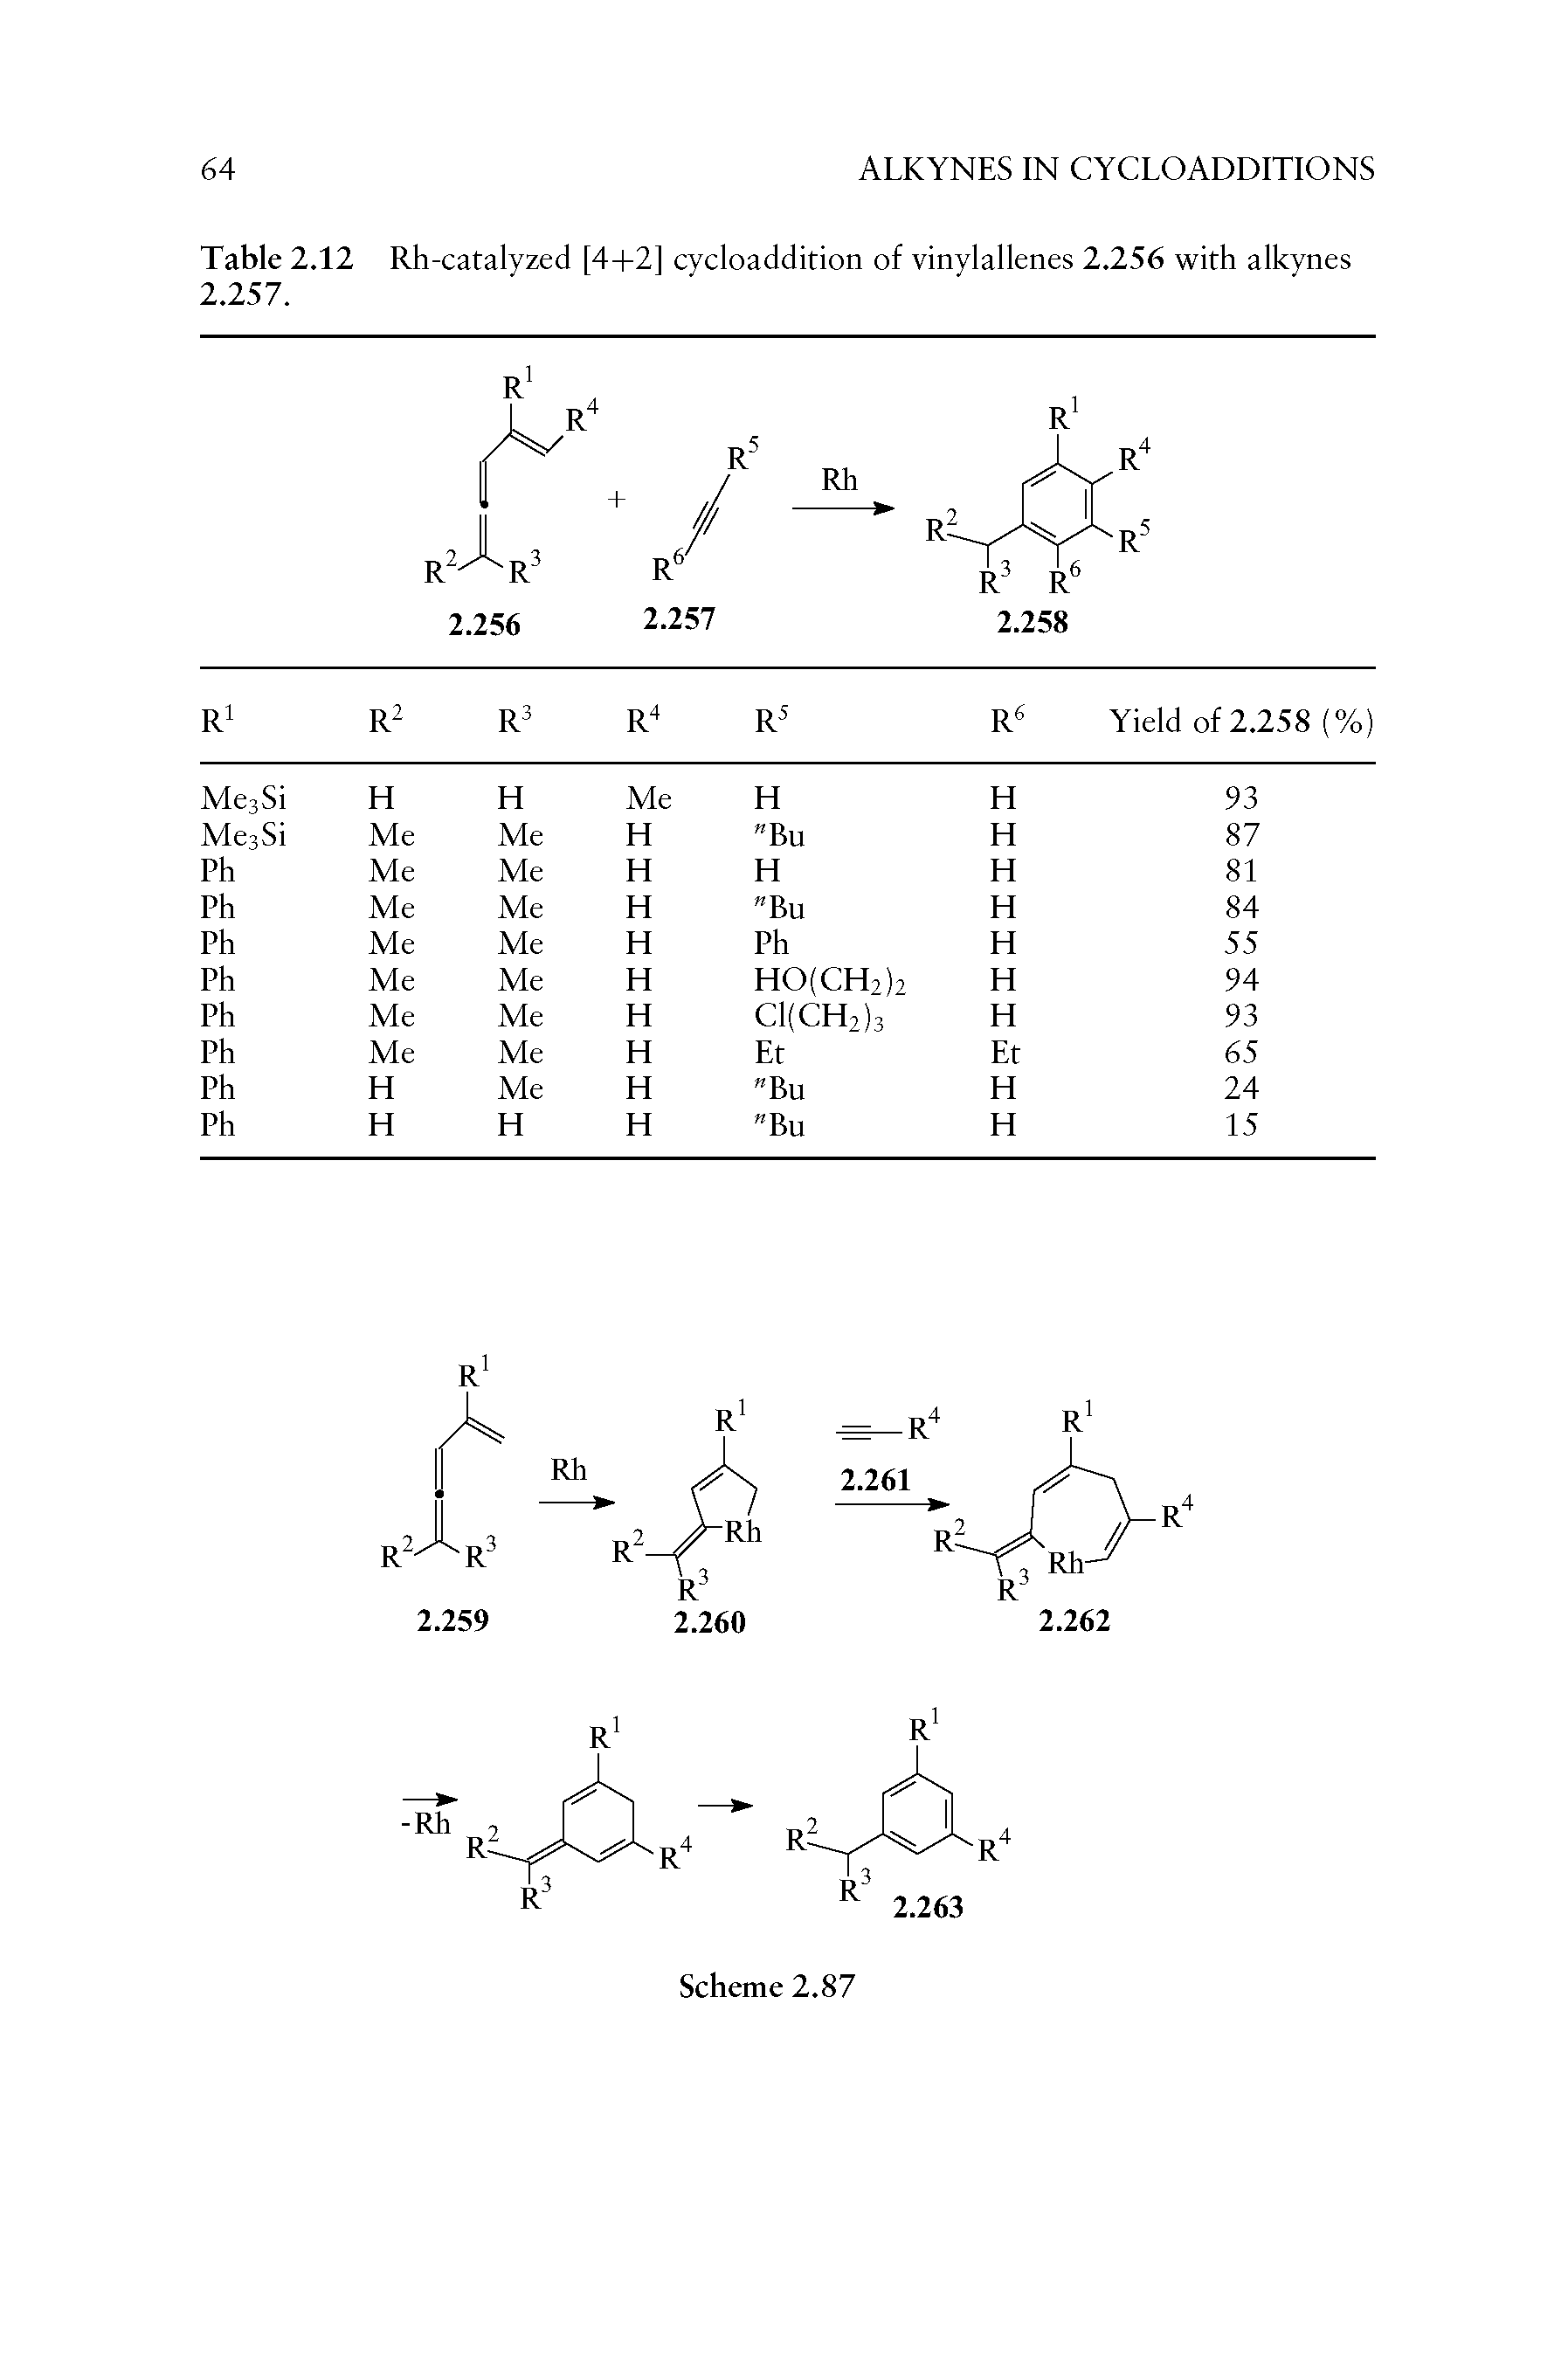 Table 2.12 Rh-catalyzed [4+2] cycloaddition of vinylallenes 2.256 with alkynes 2.257.